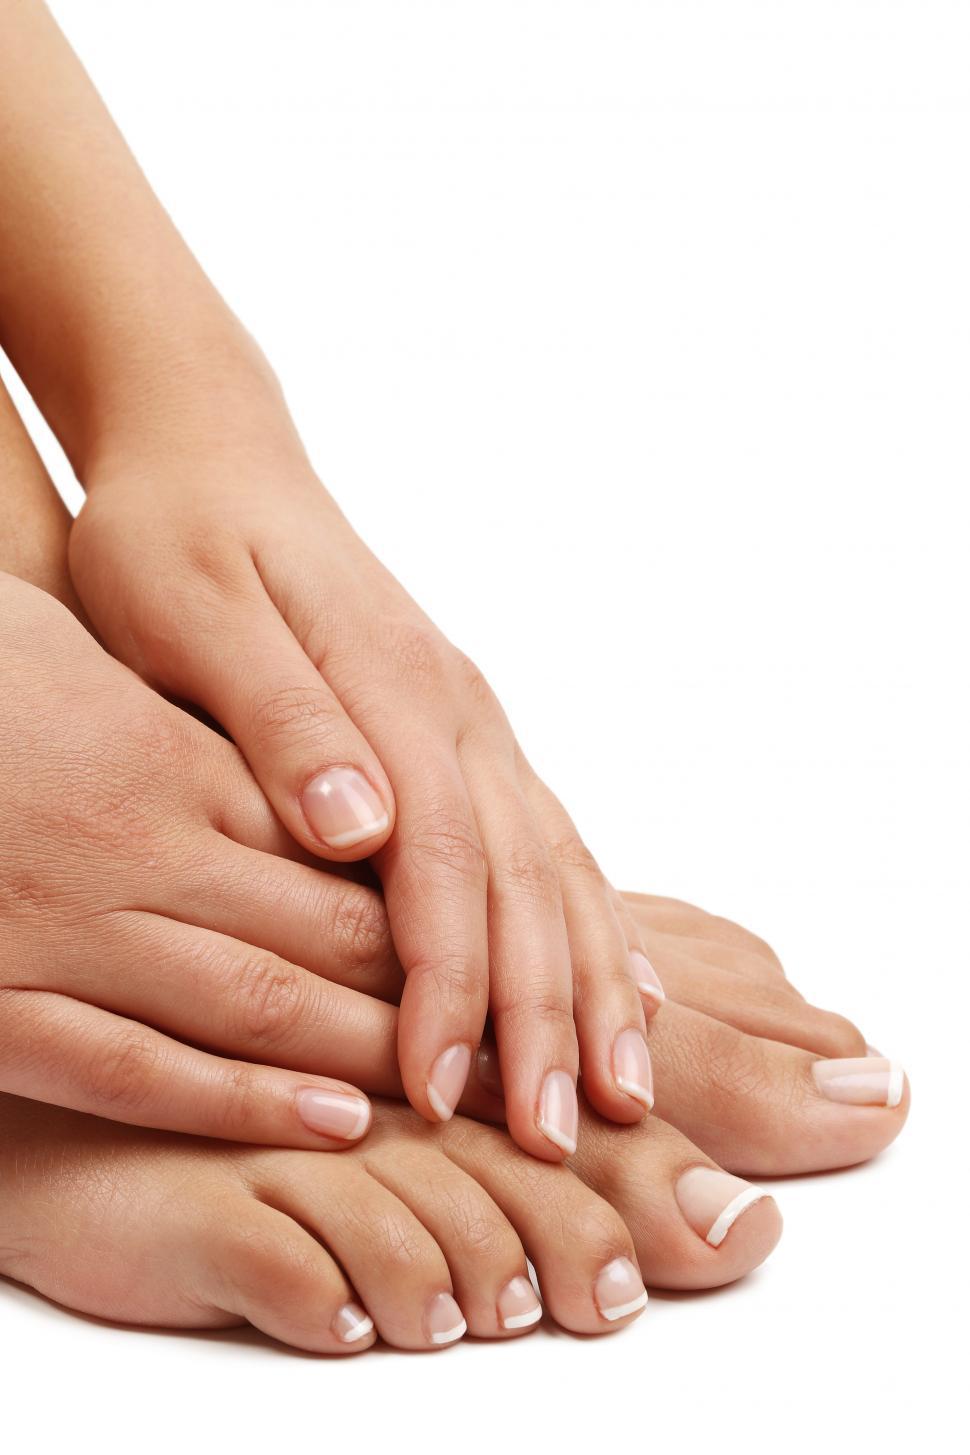 Free Image of Skin care - manicure and pedicure 